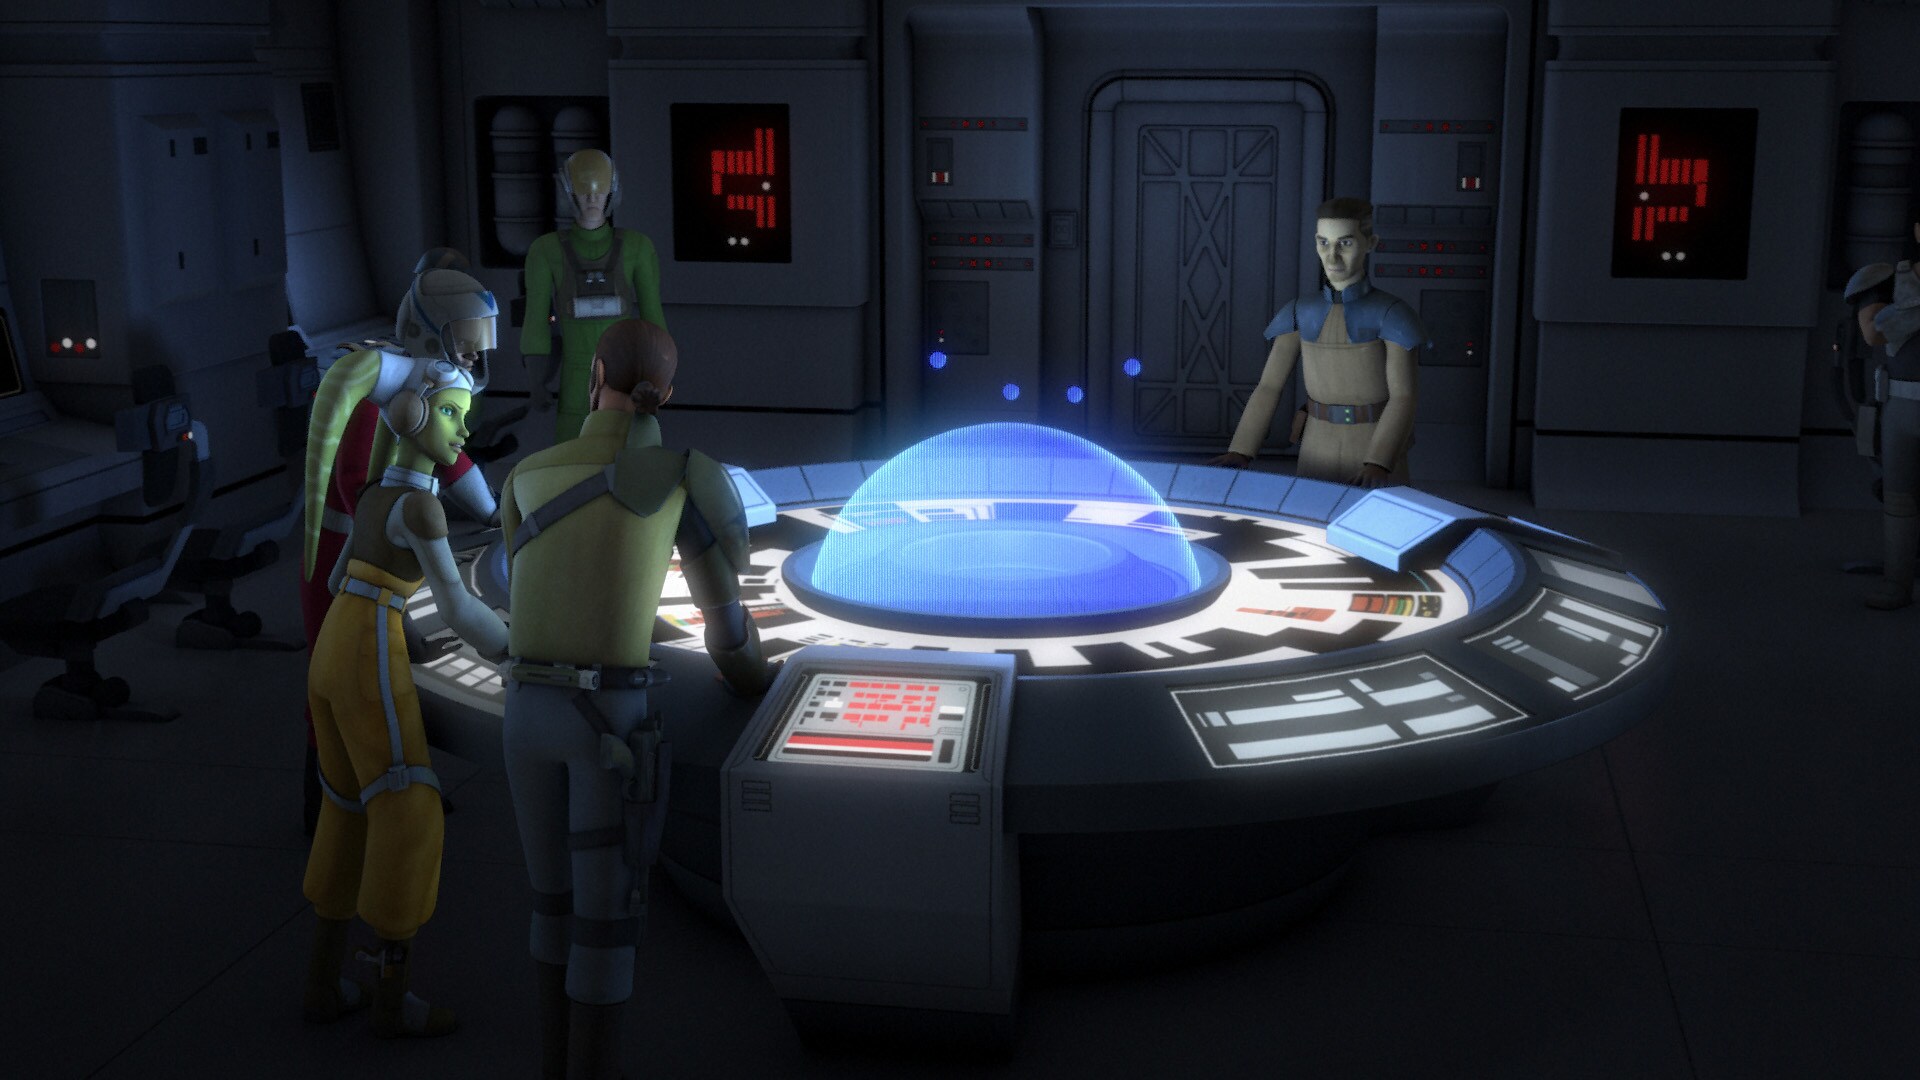 When the rebels regroup, Hera is adamant that they complete this mission. Rex has an idea -- he k...